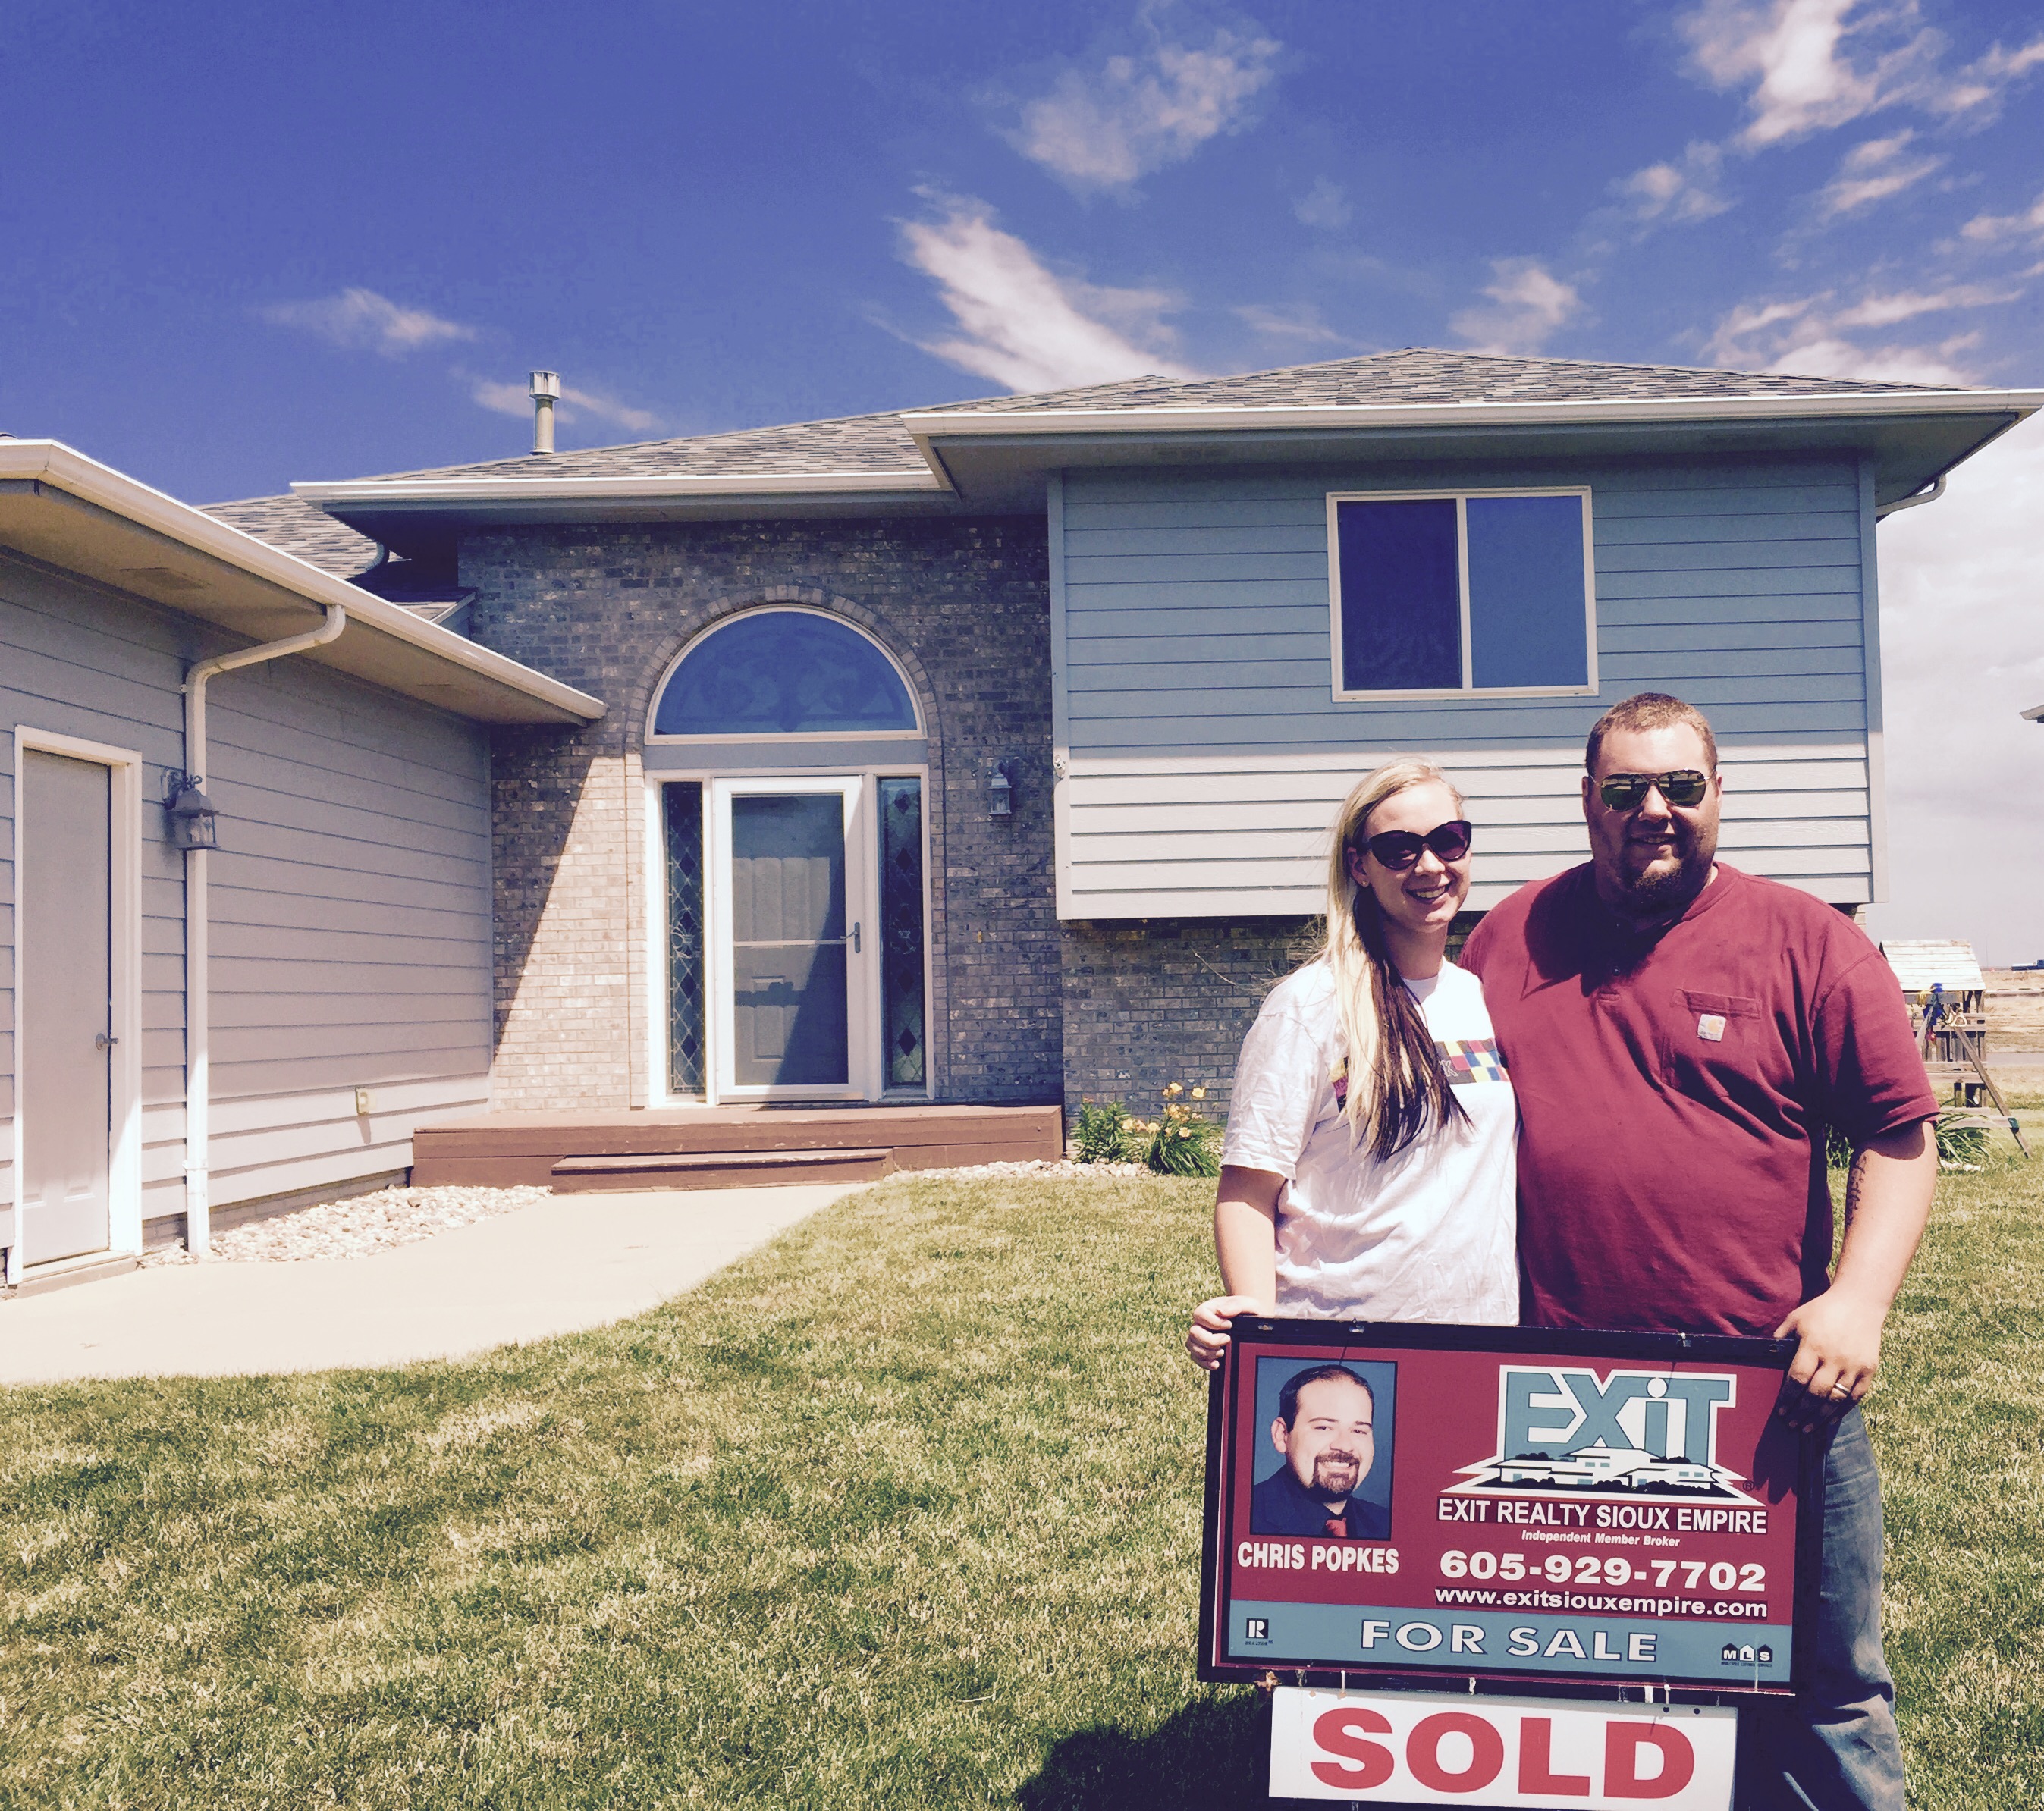 Another fantastic home SOLD in Sioux Falls!